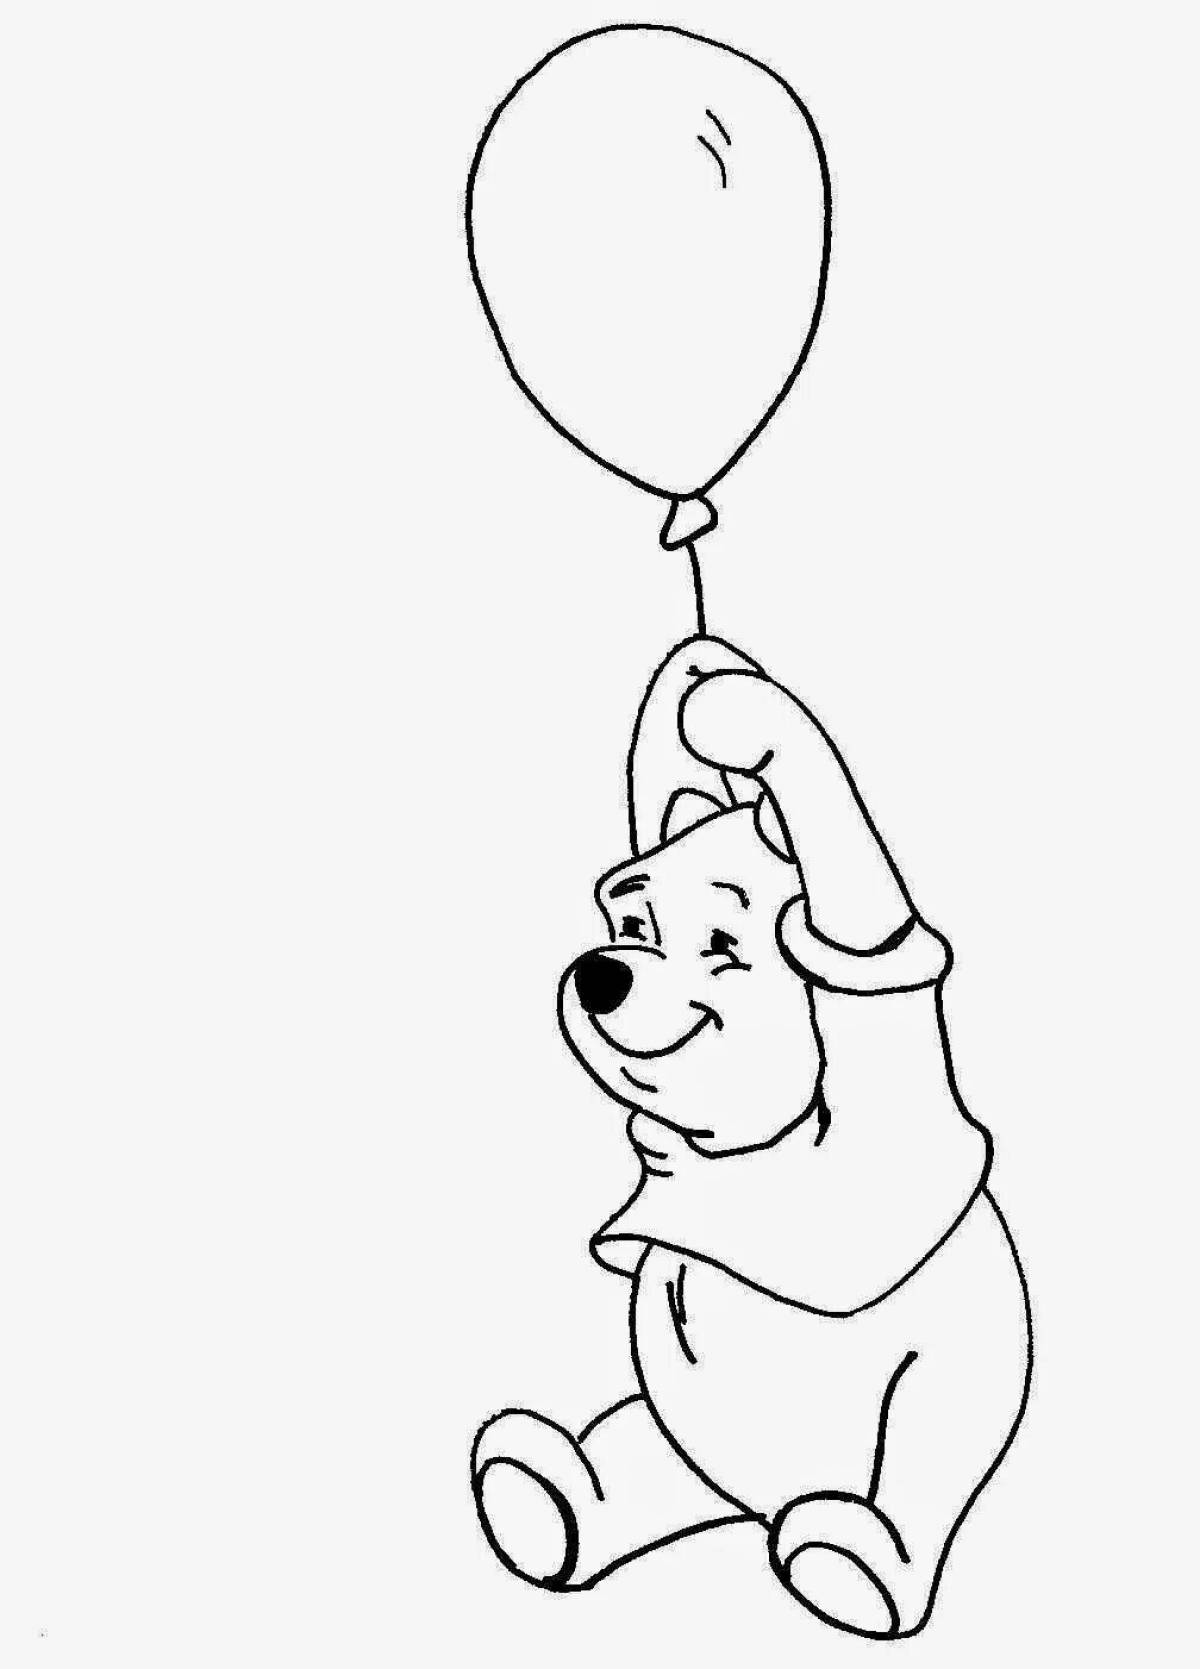 Glowing winnie the pooh with a balloon